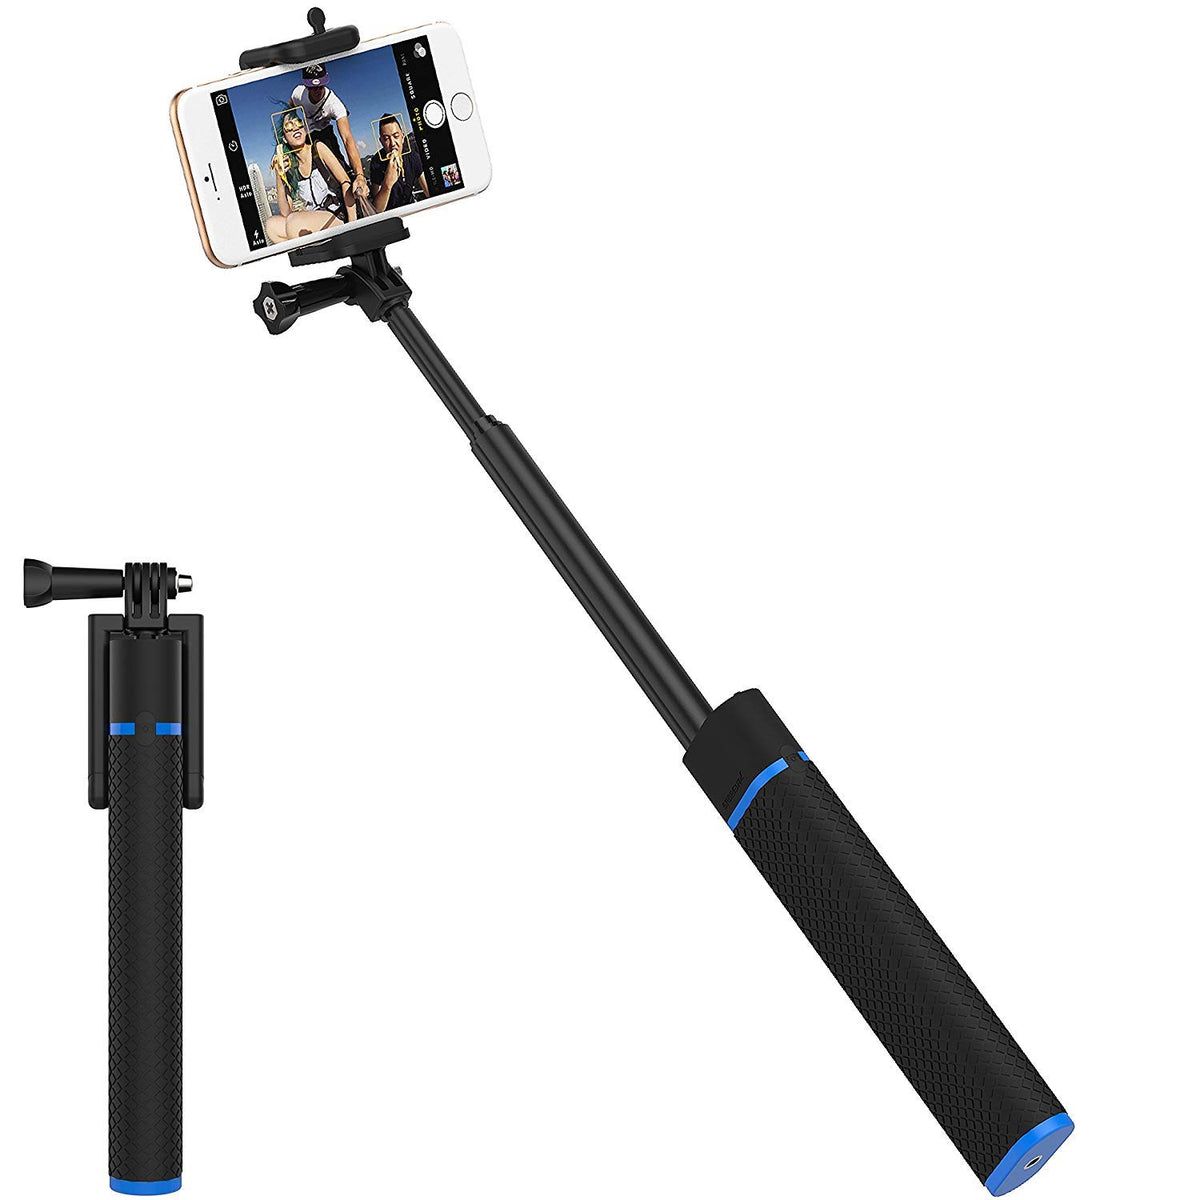 Bluetooth Selfie Stick with built-in 5200mAh battery Charger